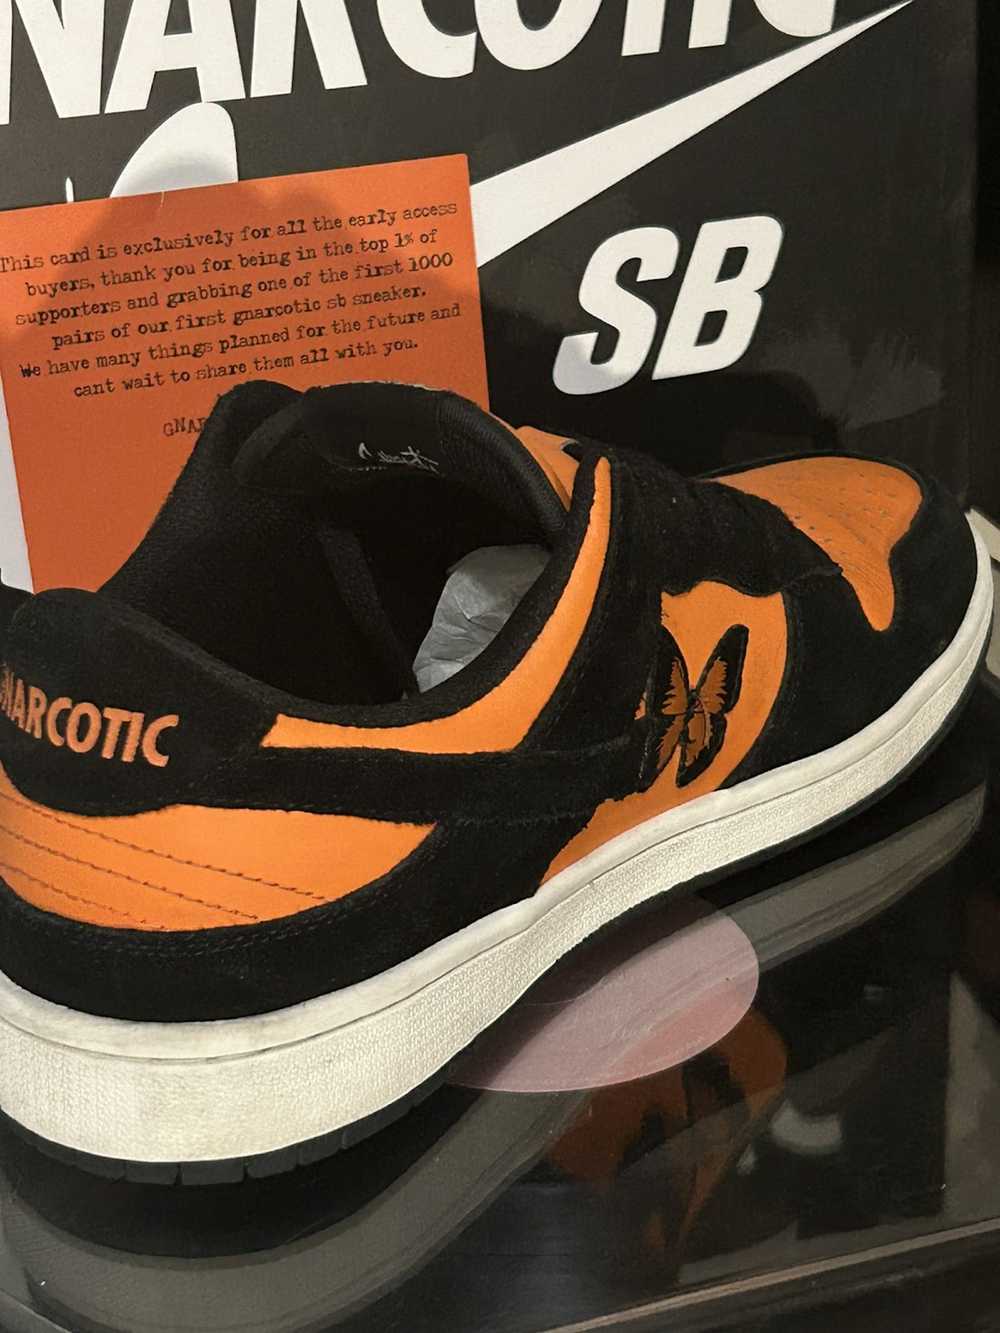 Gnarcotic gnarcotic sb sneakers - image 8